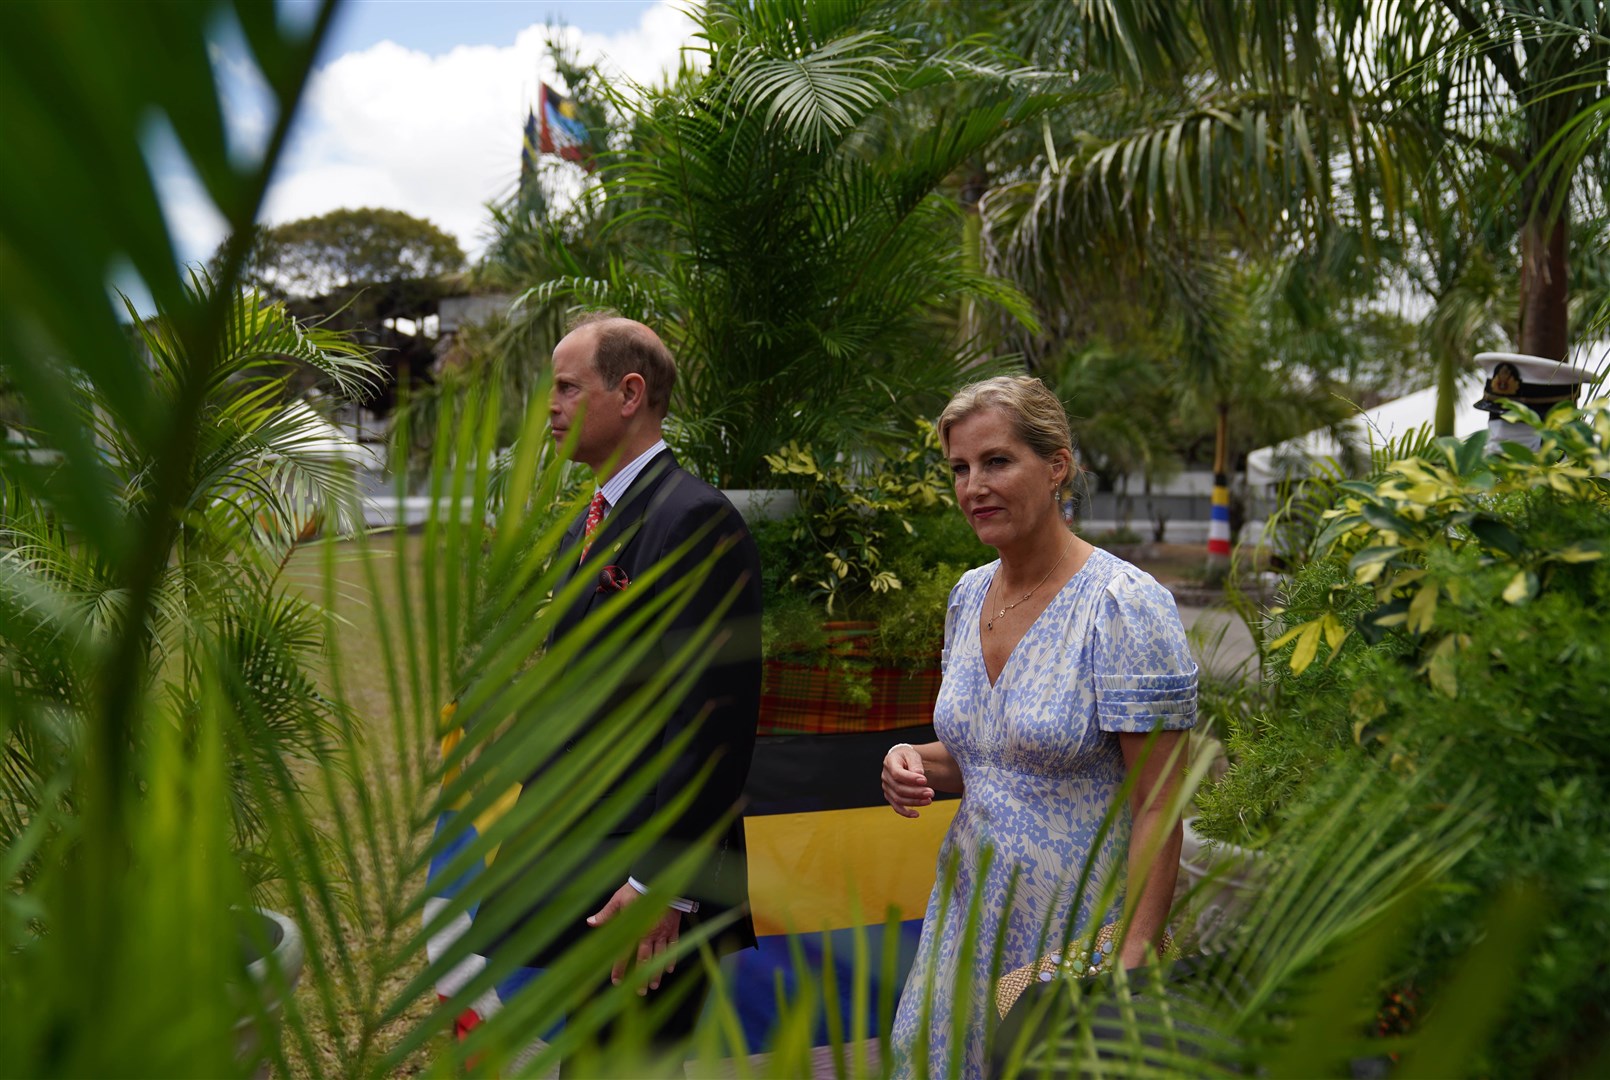 The Earl and the Countess of Wessex in the garden of Government House in St John’s, Antigua and Barbuda, in April (Joe Giddens/PA)